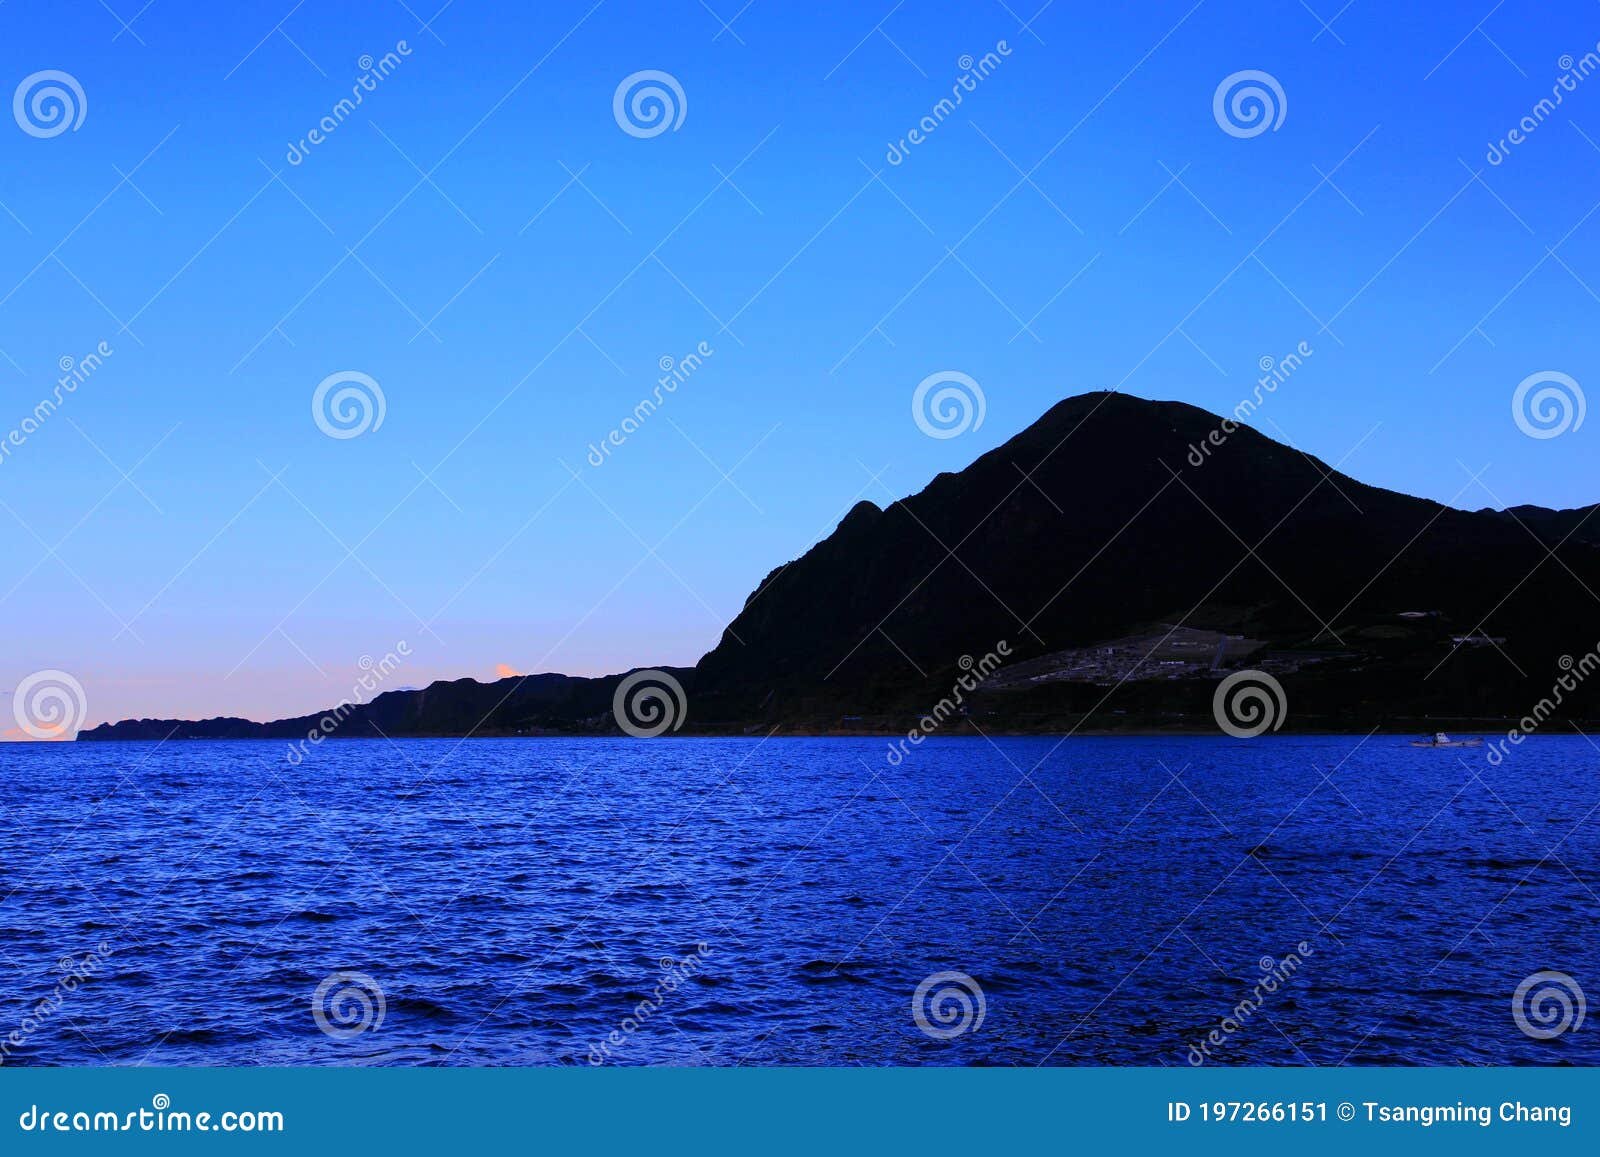 blue sky with peacefull cotton clouds and sunset scenery of taiwan`s north coast